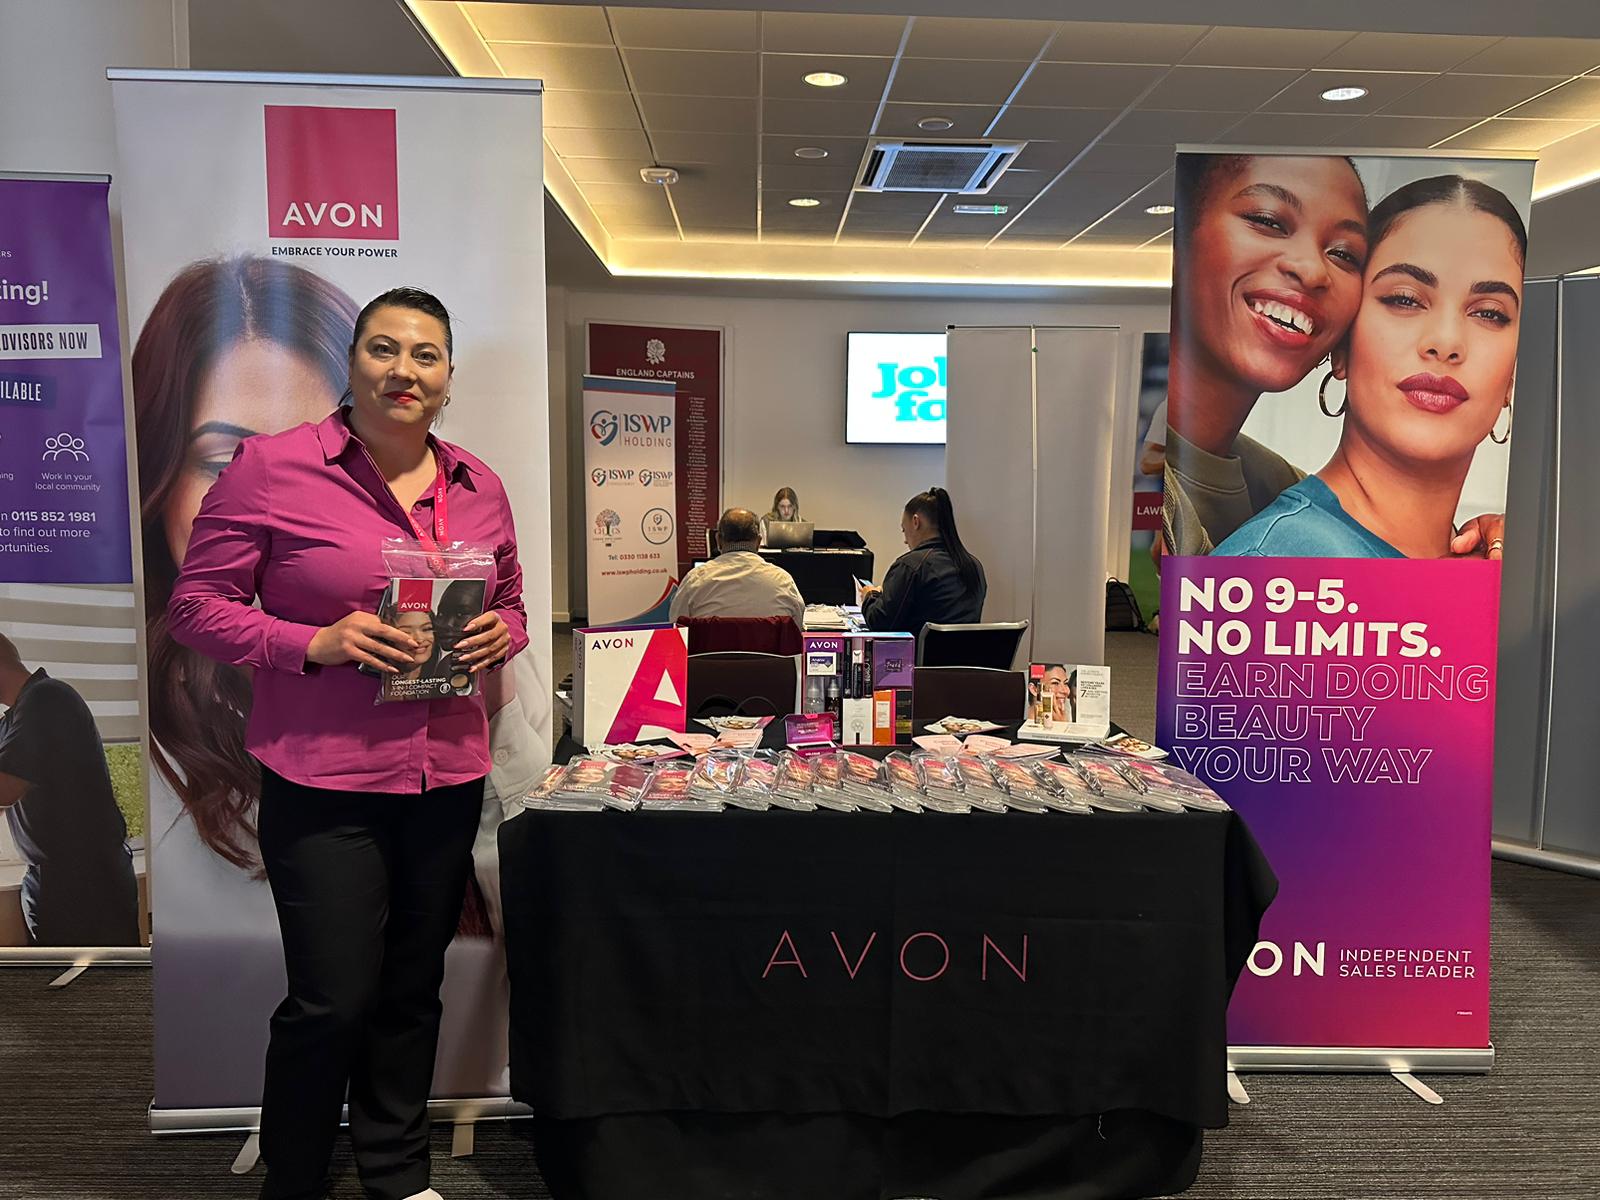 Avon at our event in West London